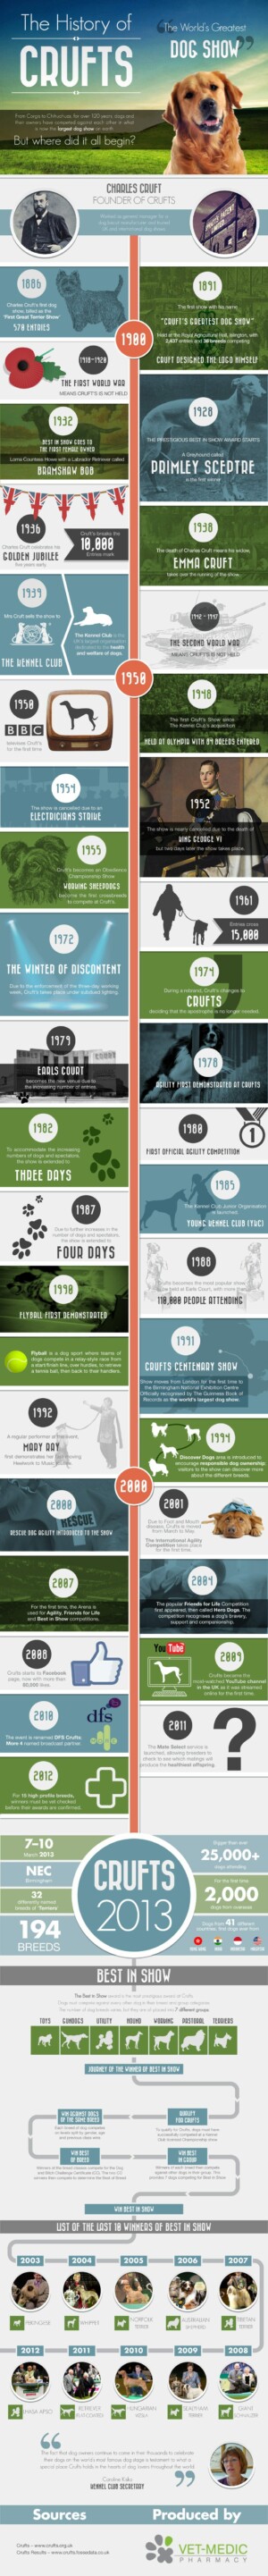 A History of Crufts